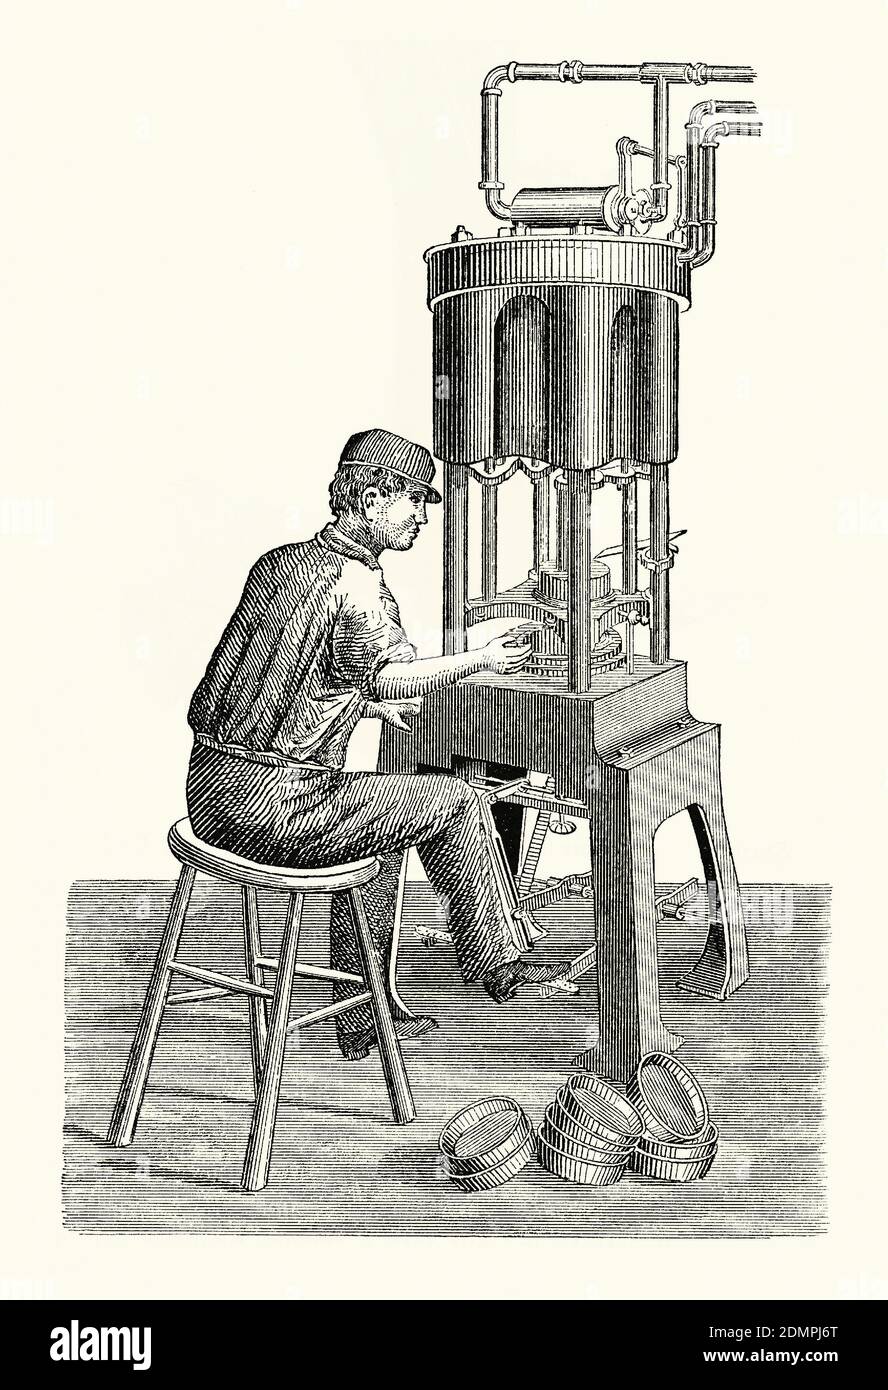 An old engraving of a worker operating a machine for shaping sheet metal in the 1800s. It is from a Victorian mechanical engineering book of the 1880s. Stamping or pressing is the process of placing flat sheet metal form onto a die (shaped metal mould) in a stamping press. Steam-powered, foot-operated pistons are operated, pressing down the flat sheet into the shaped die and into the form required. Here examples of finished, round tins lie on the ground. Stock Photo